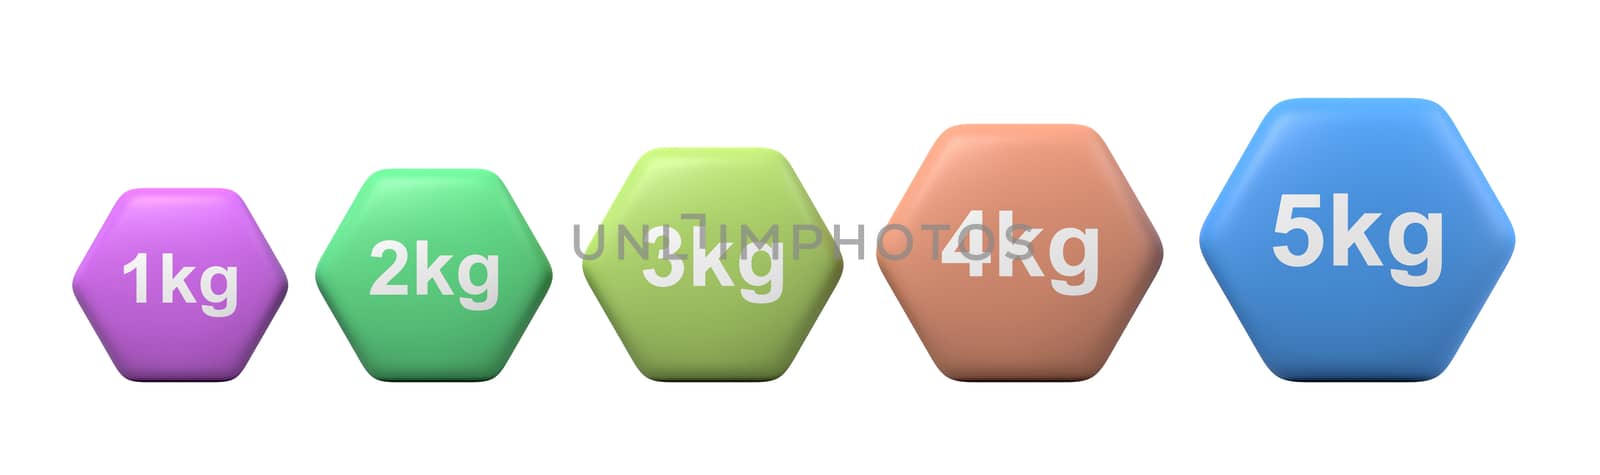 Colorful Dumbbells Set Isolated on White Background by make